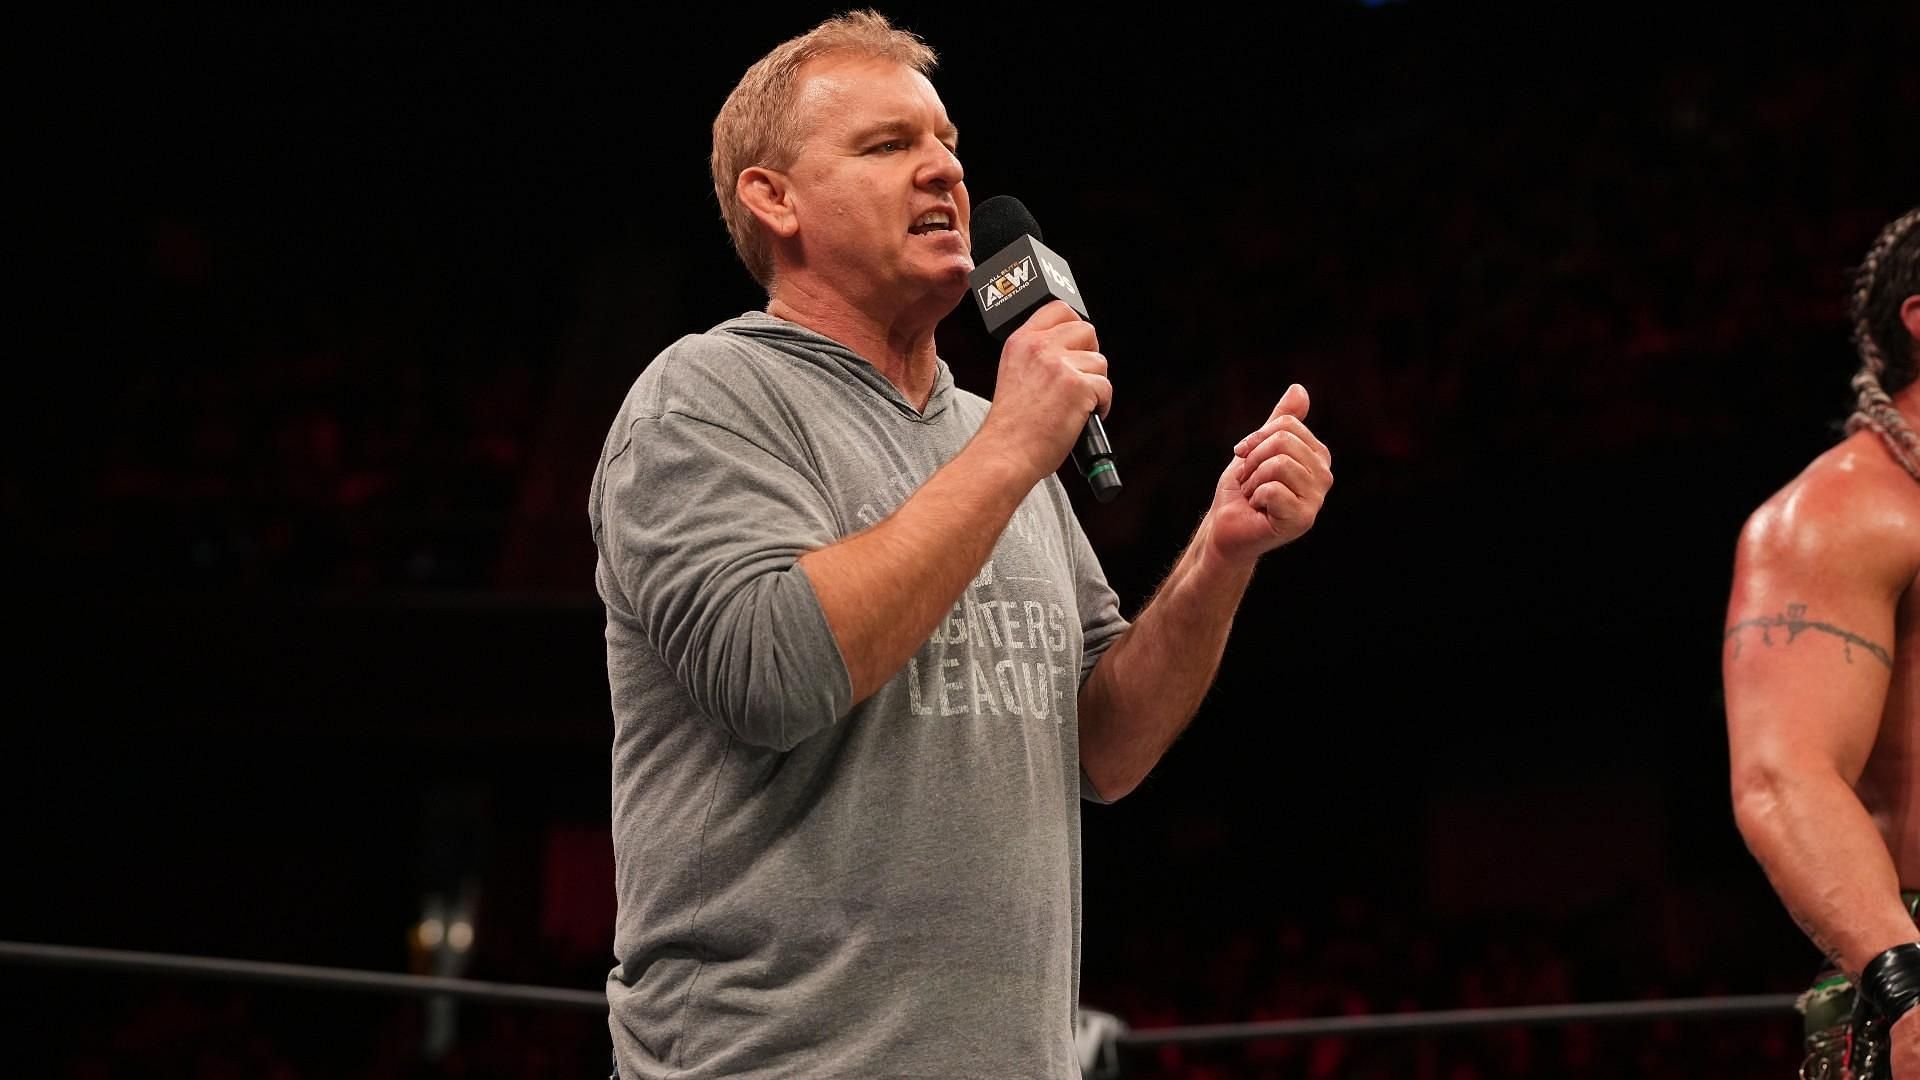 Former Wwe Manager Points Out The Issue Regarding Dan Lambert In Aew